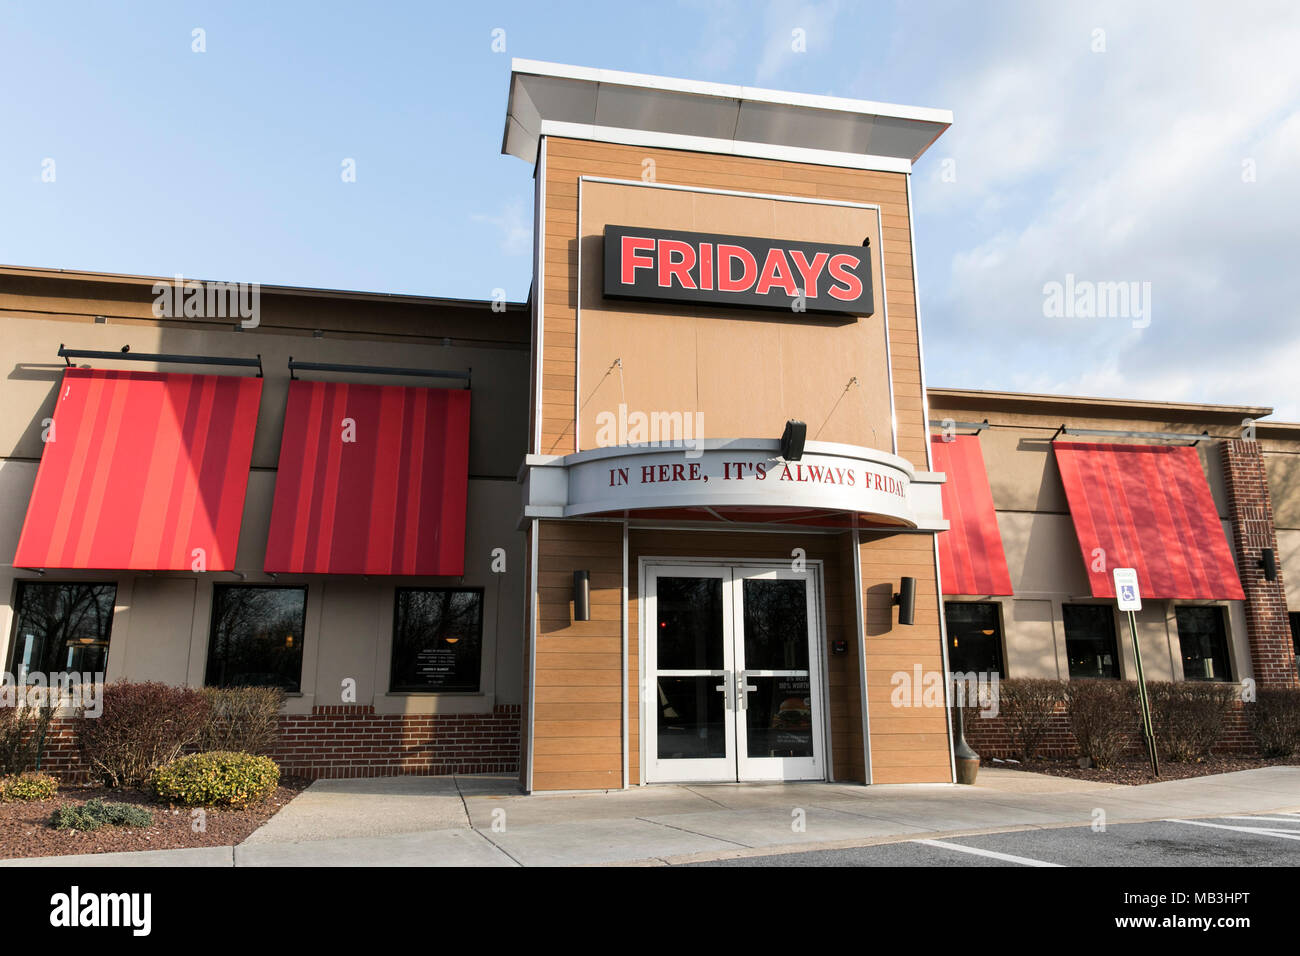 A TGI Fridays restaurant location in Hagerstown, Maryland on April 5, 2018. Stock Photo